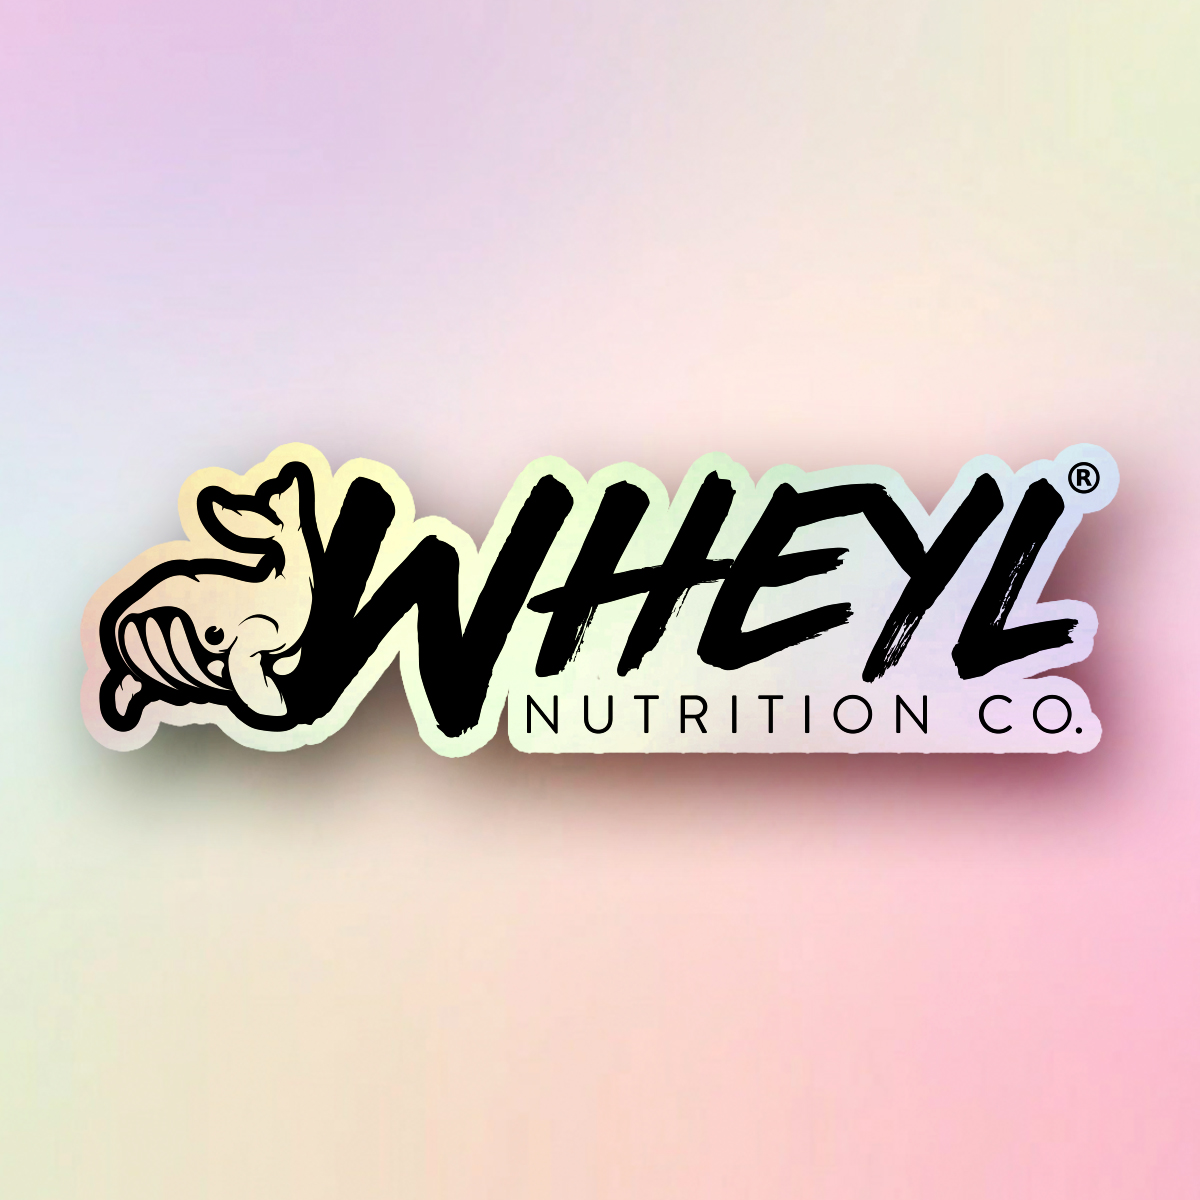 Wheyl Nutrition Co.